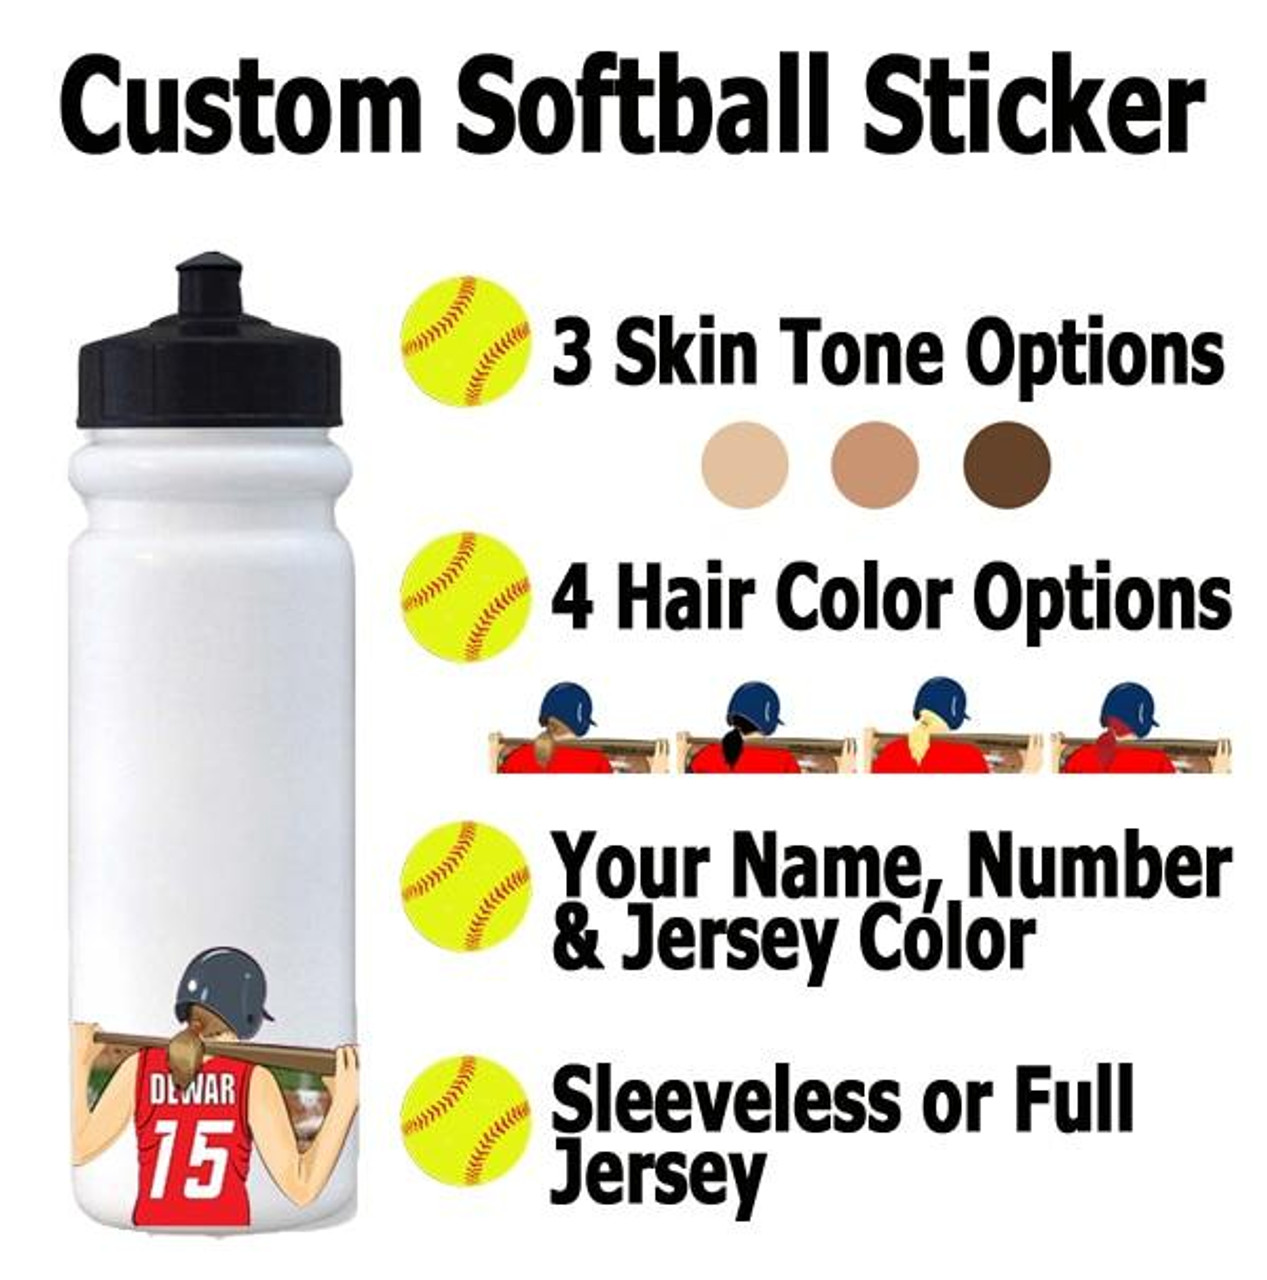 https://cdn11.bigcommerce.com/s-fgahe43b/images/stencil/1280x1280/products/428/4989/personalized-softball-water-bottle-sticker__04564.1690045839.jpg?c=2